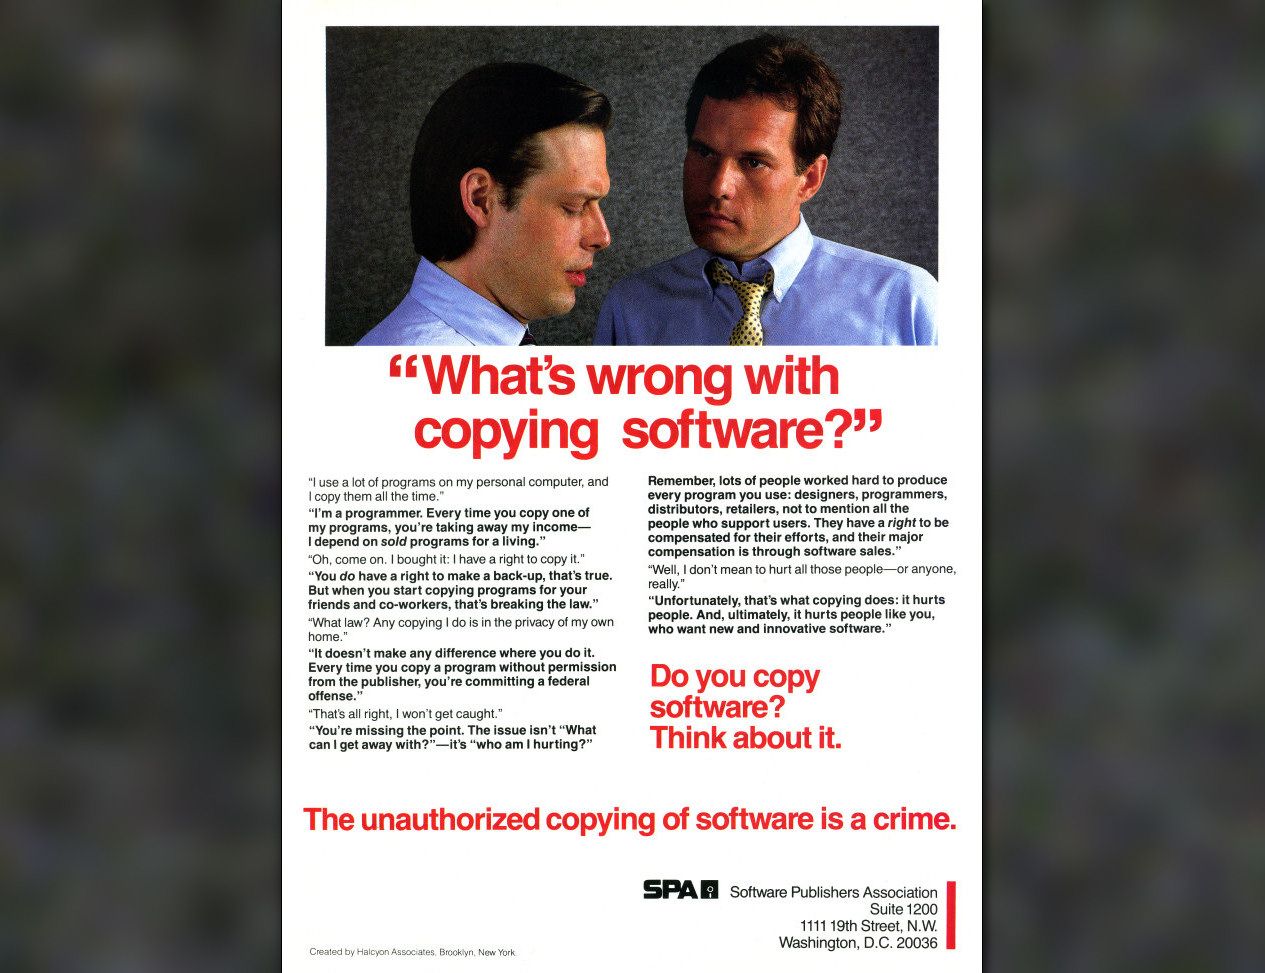 A 1984 anti-piracy ad from the Software Publishers Association.